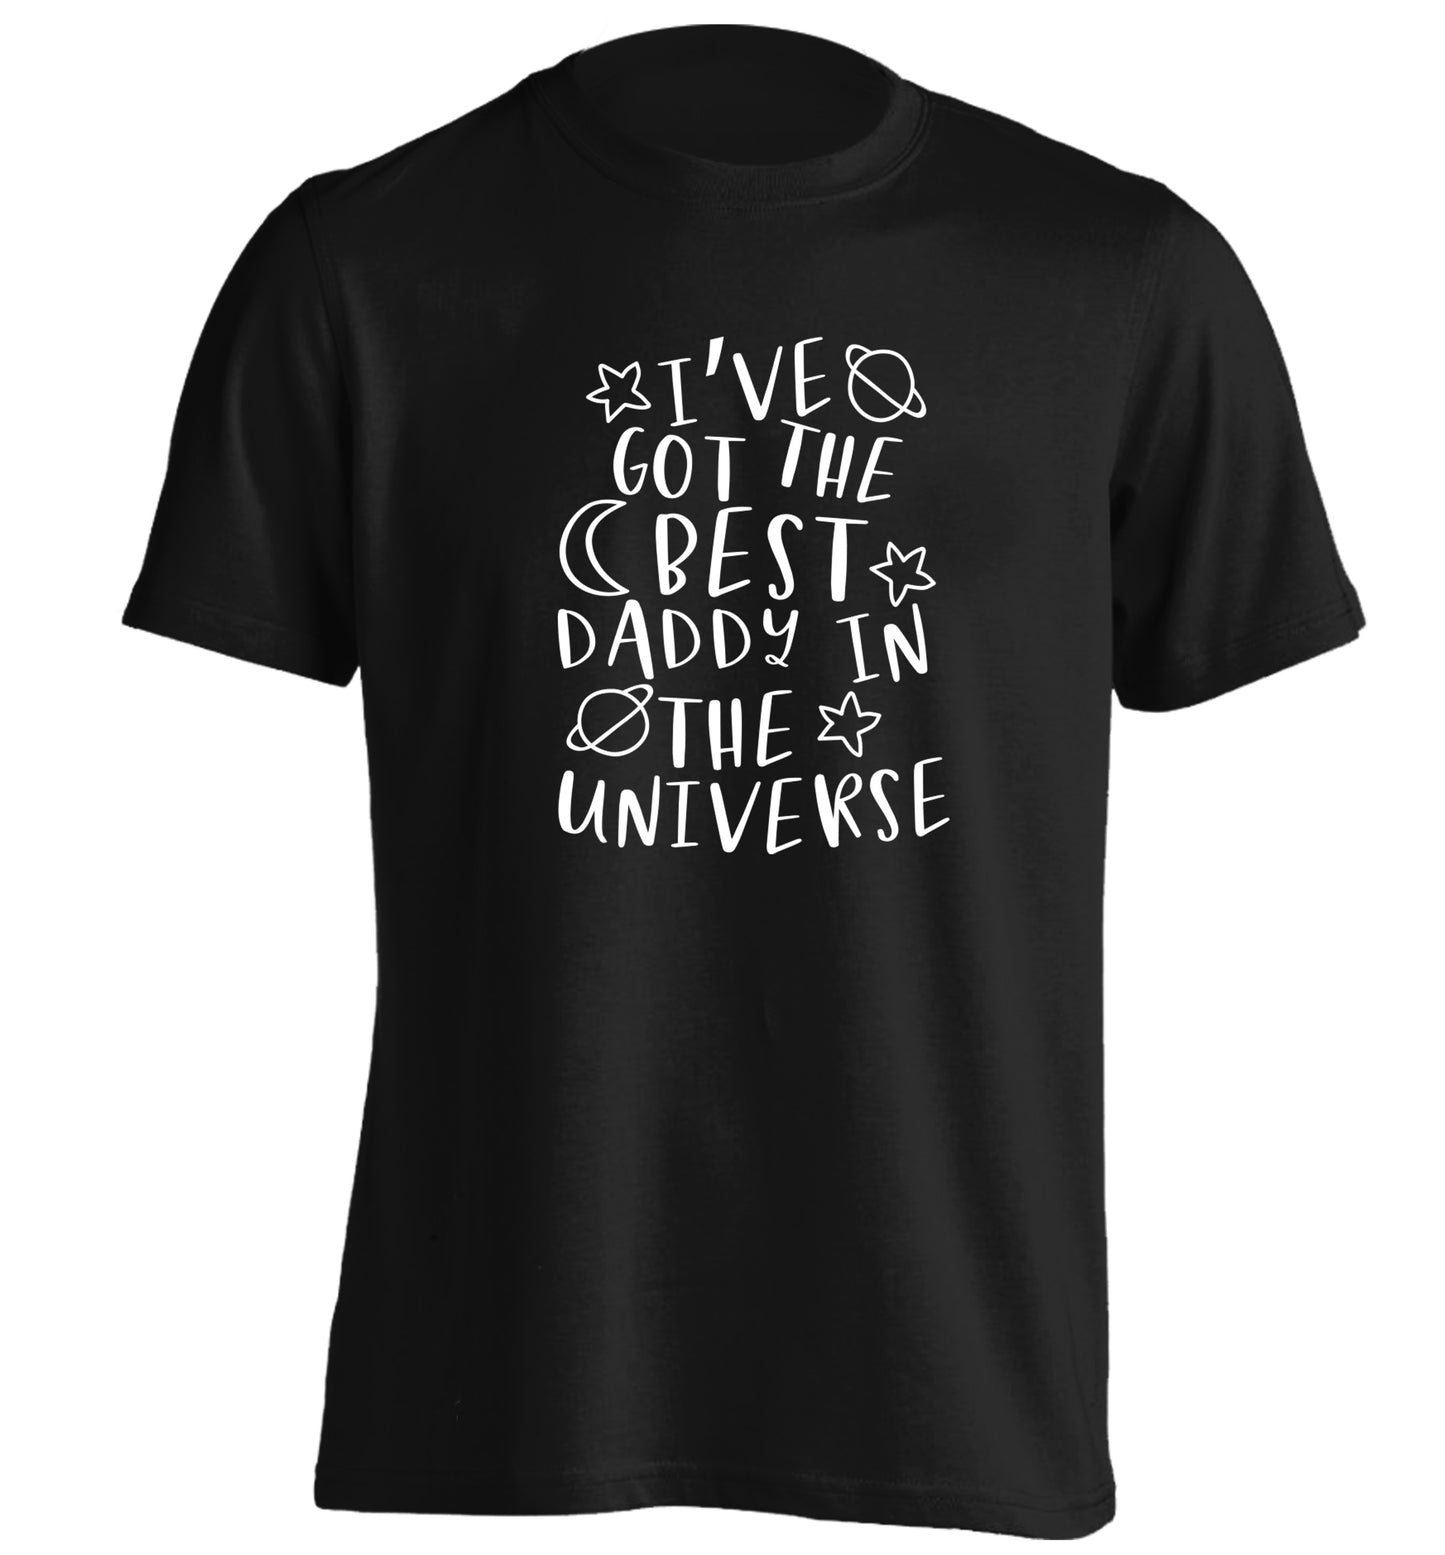 I've got the best daddy in the universe adults unisex black Tshirt 2XL